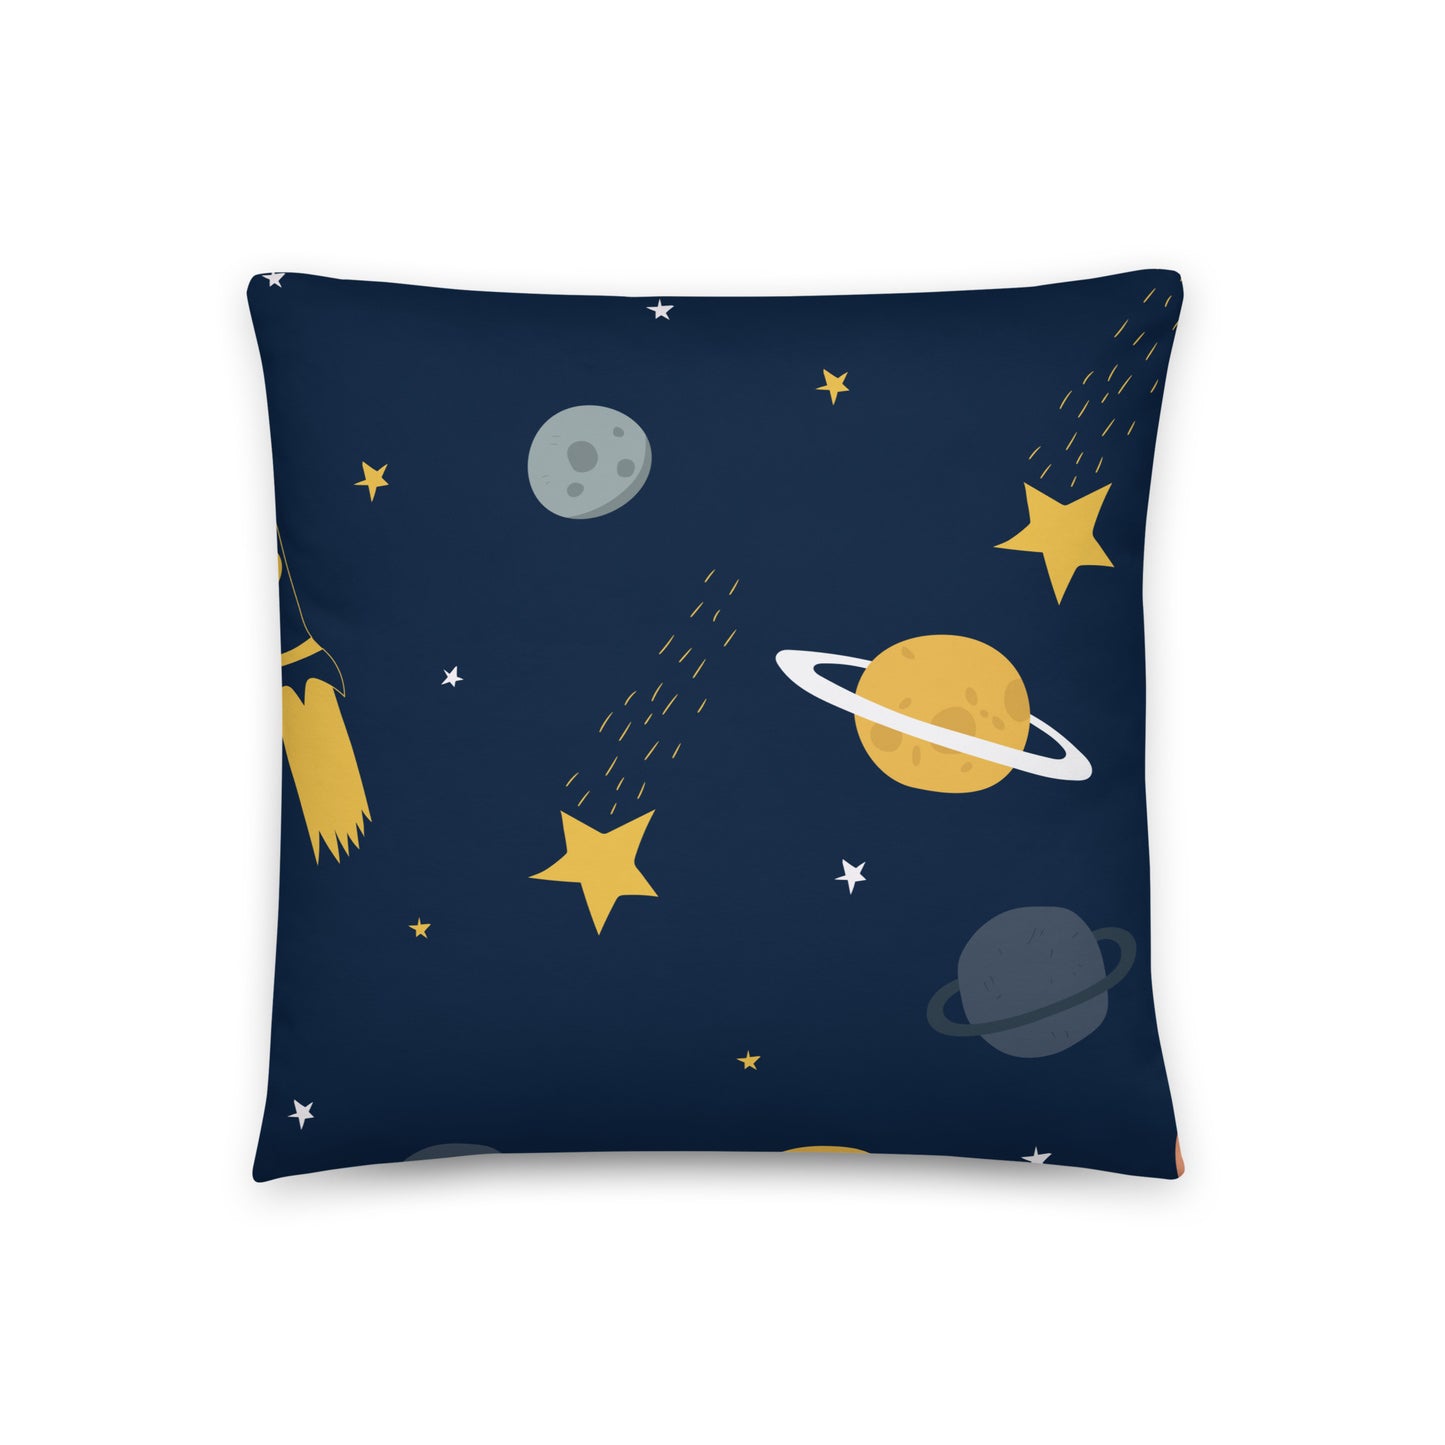 Outer Space - Sustainably Made Pillows